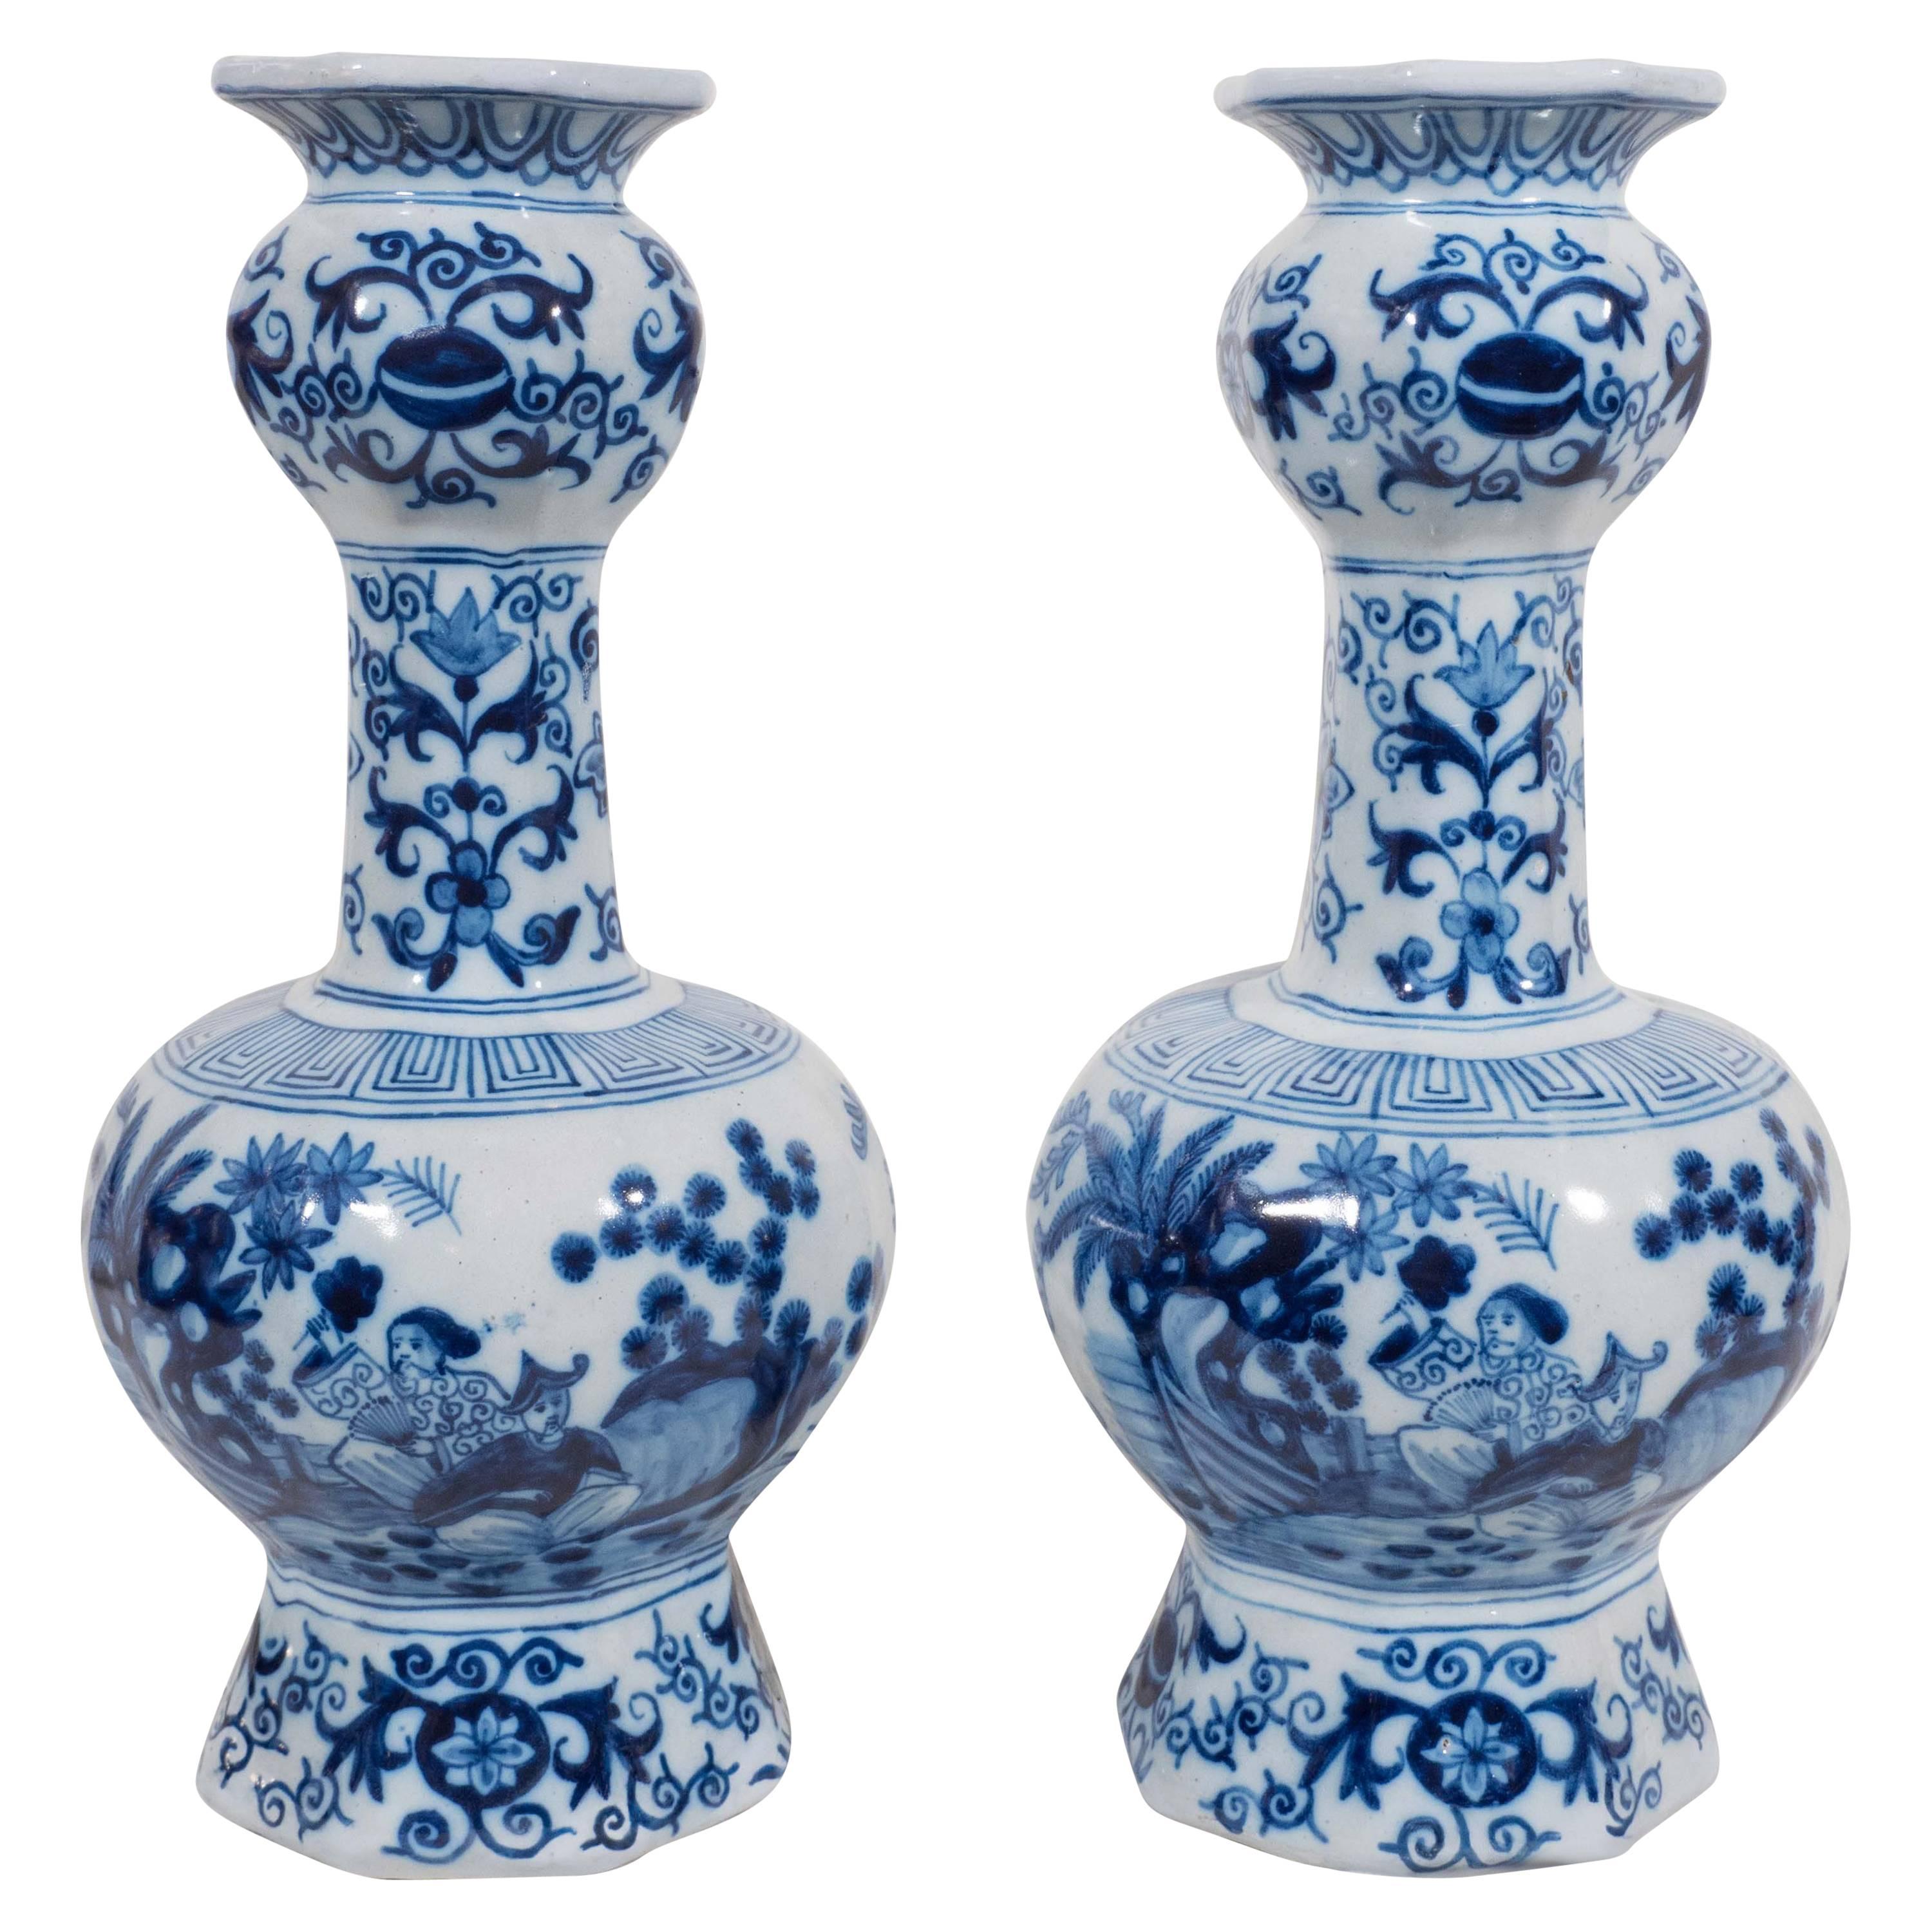 Pair of Blue and White Delft Vases with Chinoiserie Decoration